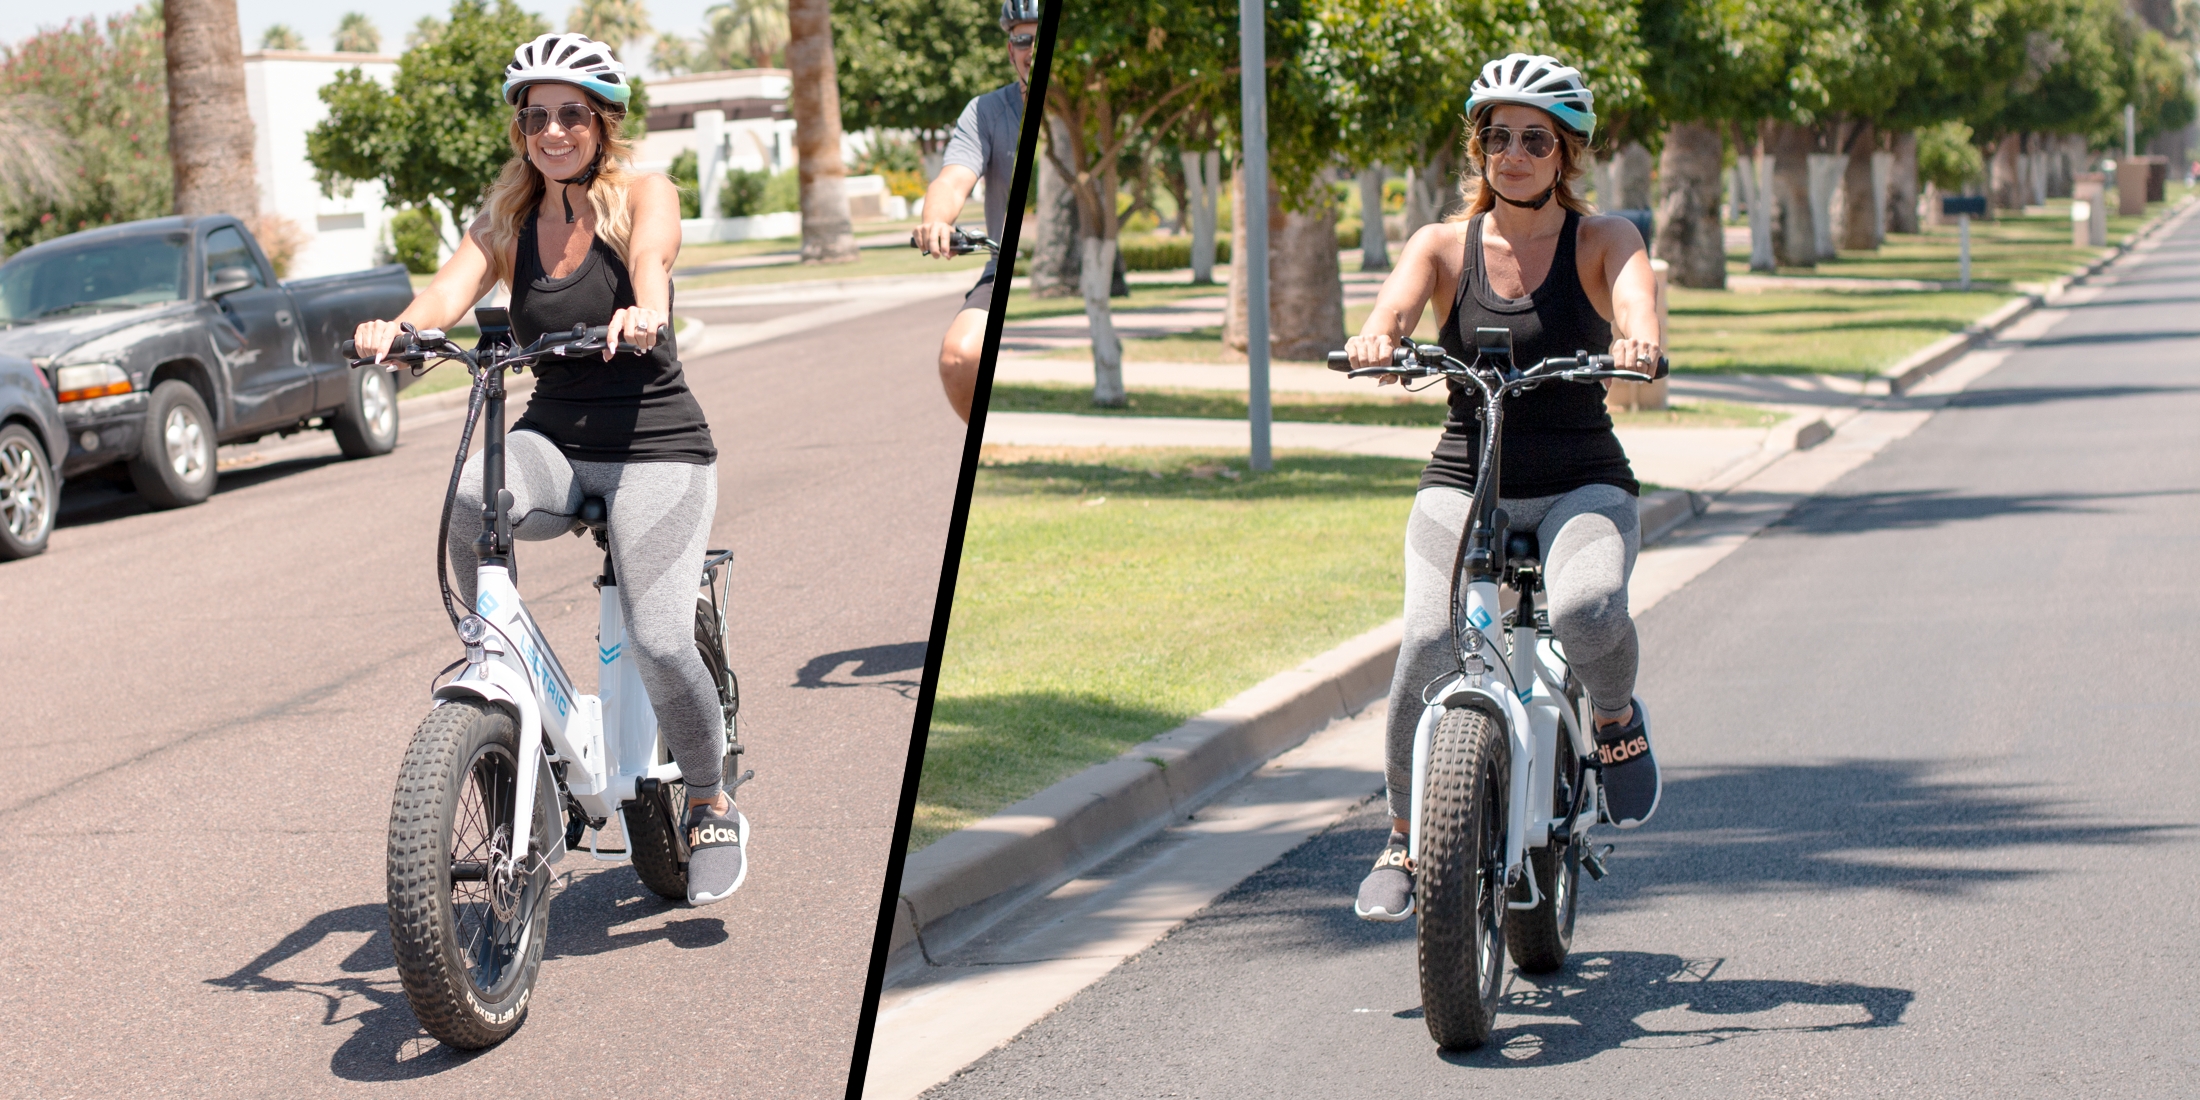 lectric xp ebike review